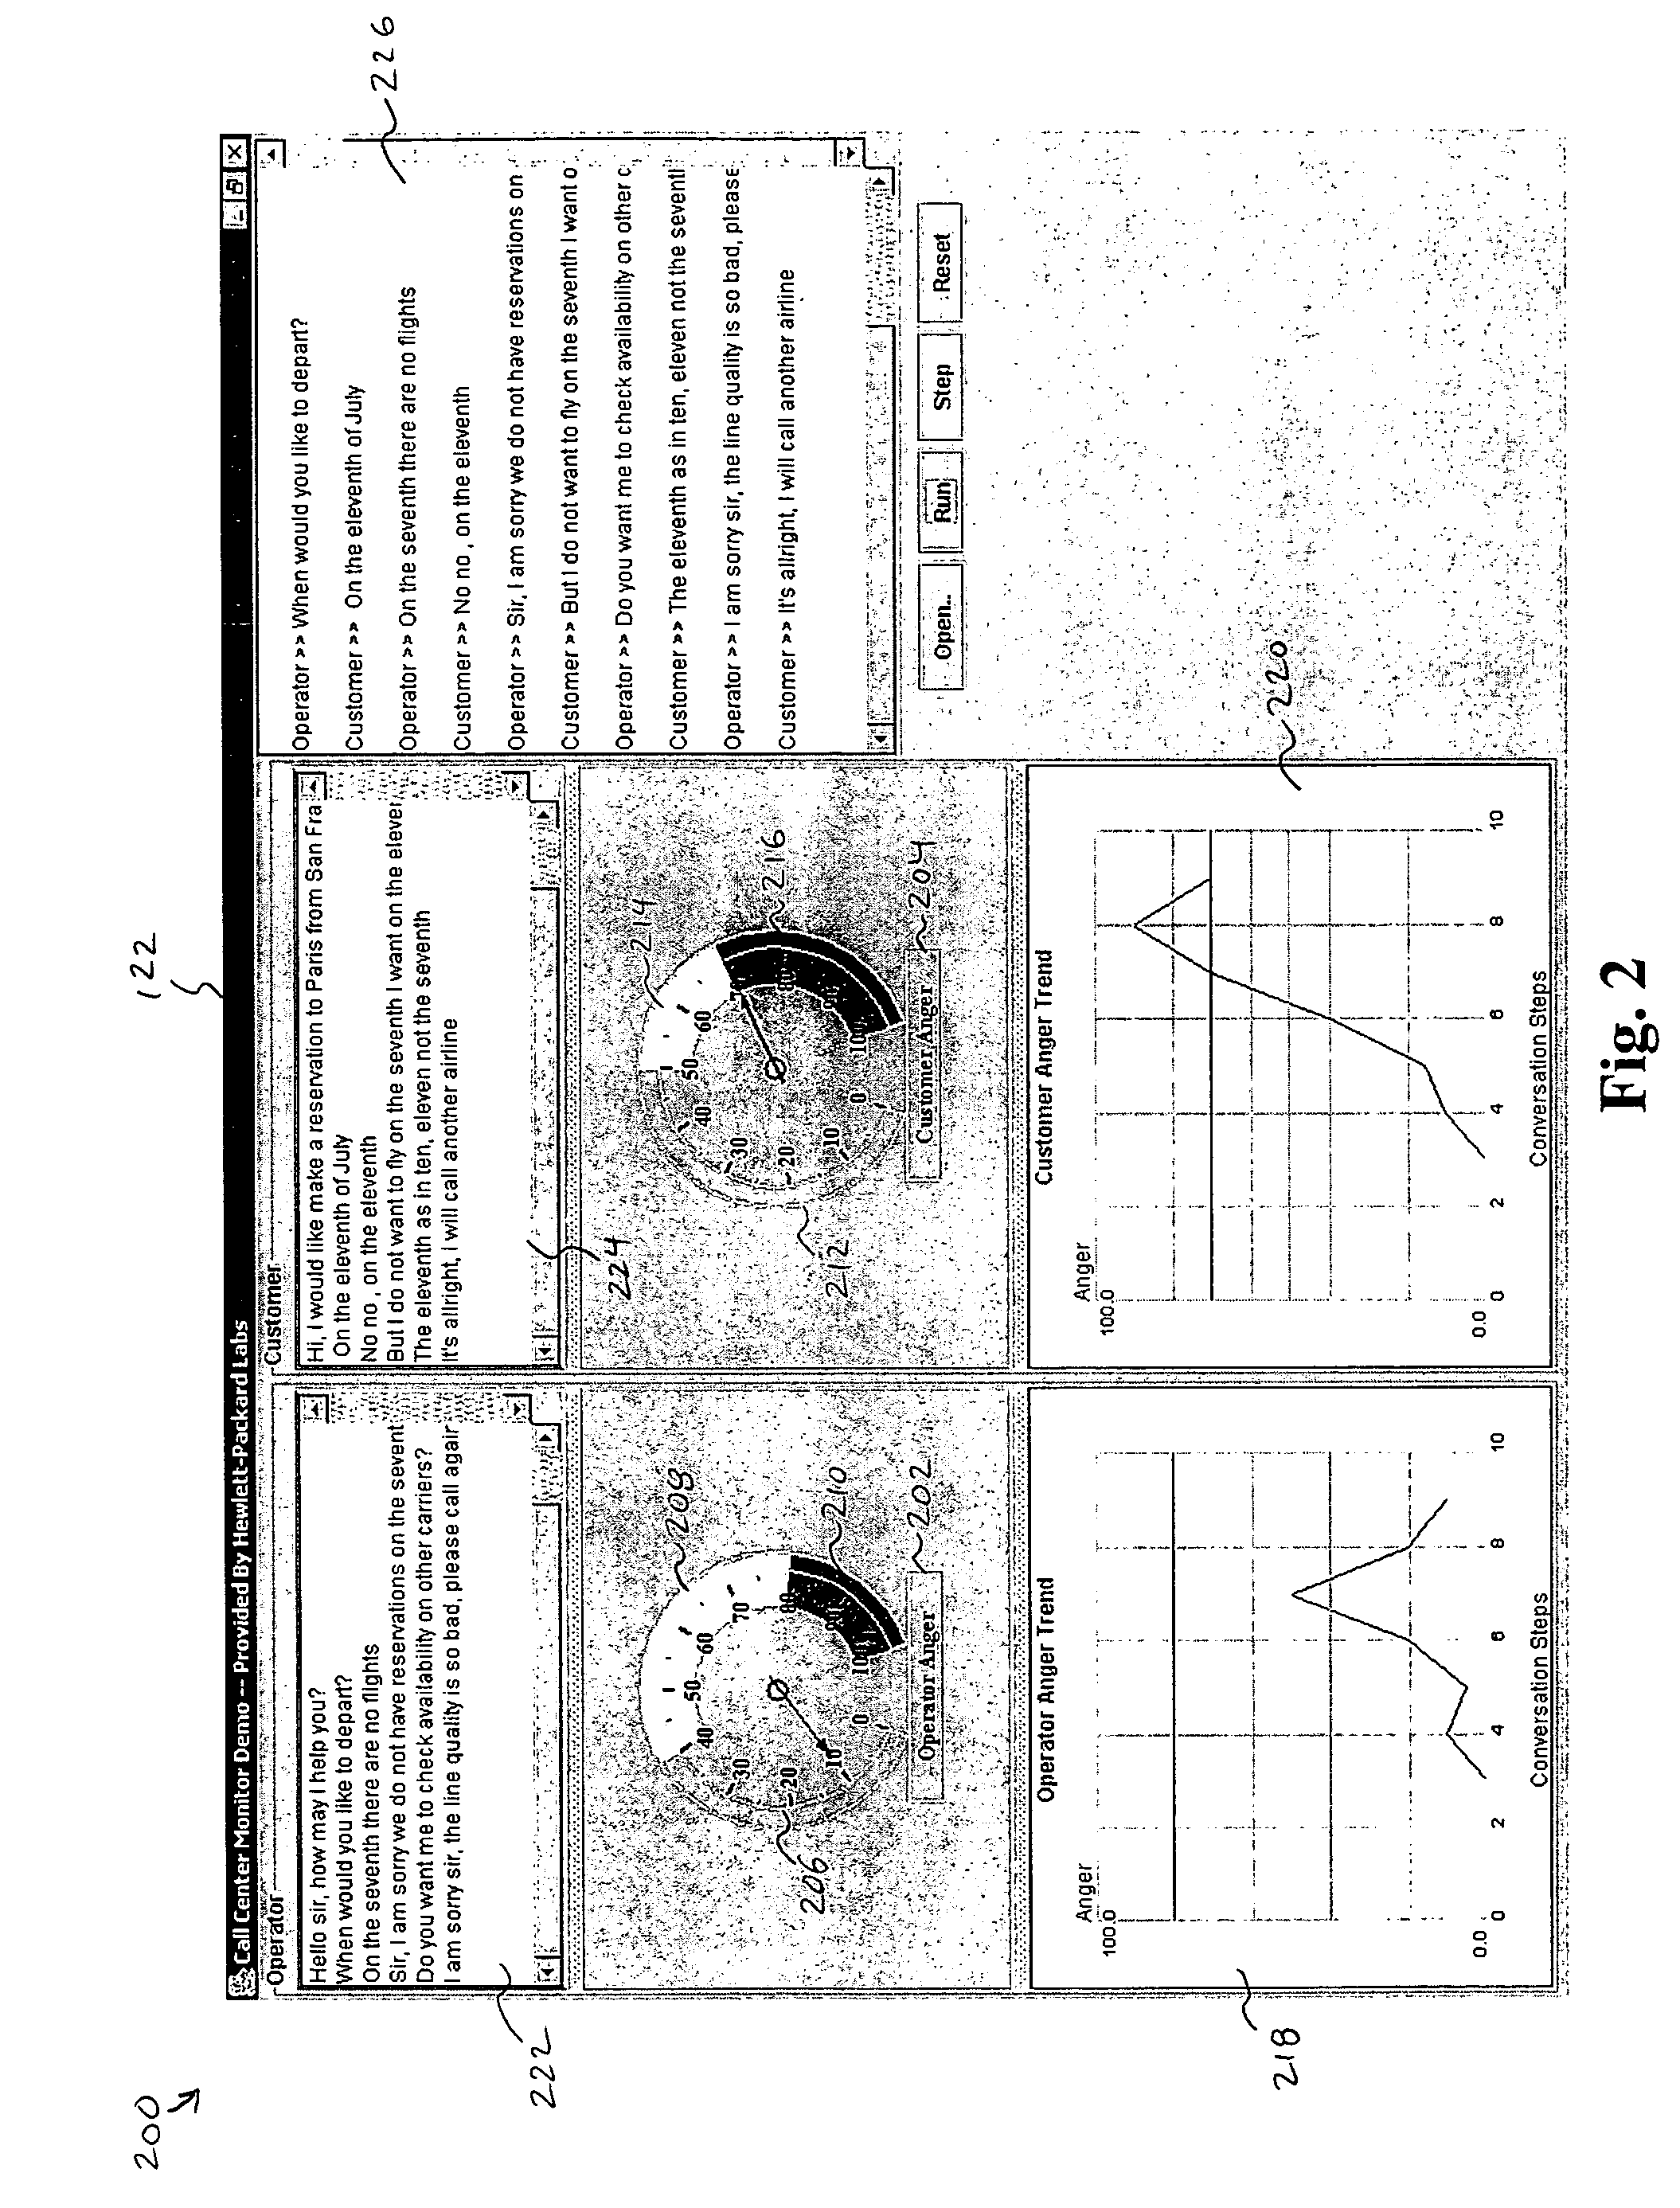 System and method for dialog management within a call handling system